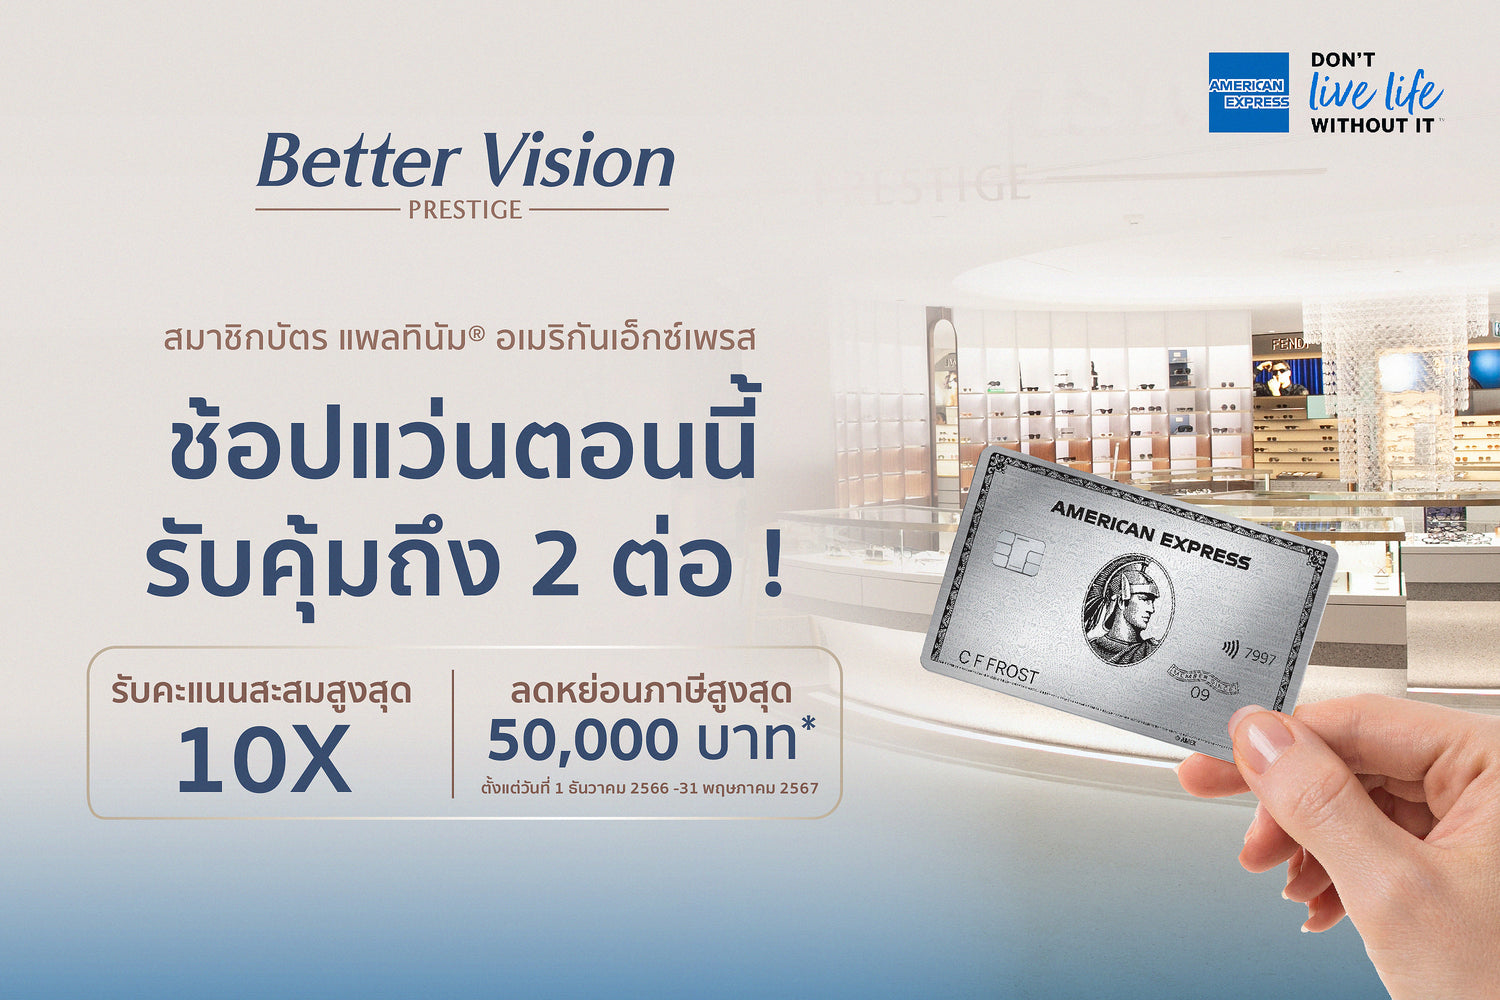 American express and Better Vision Prestige